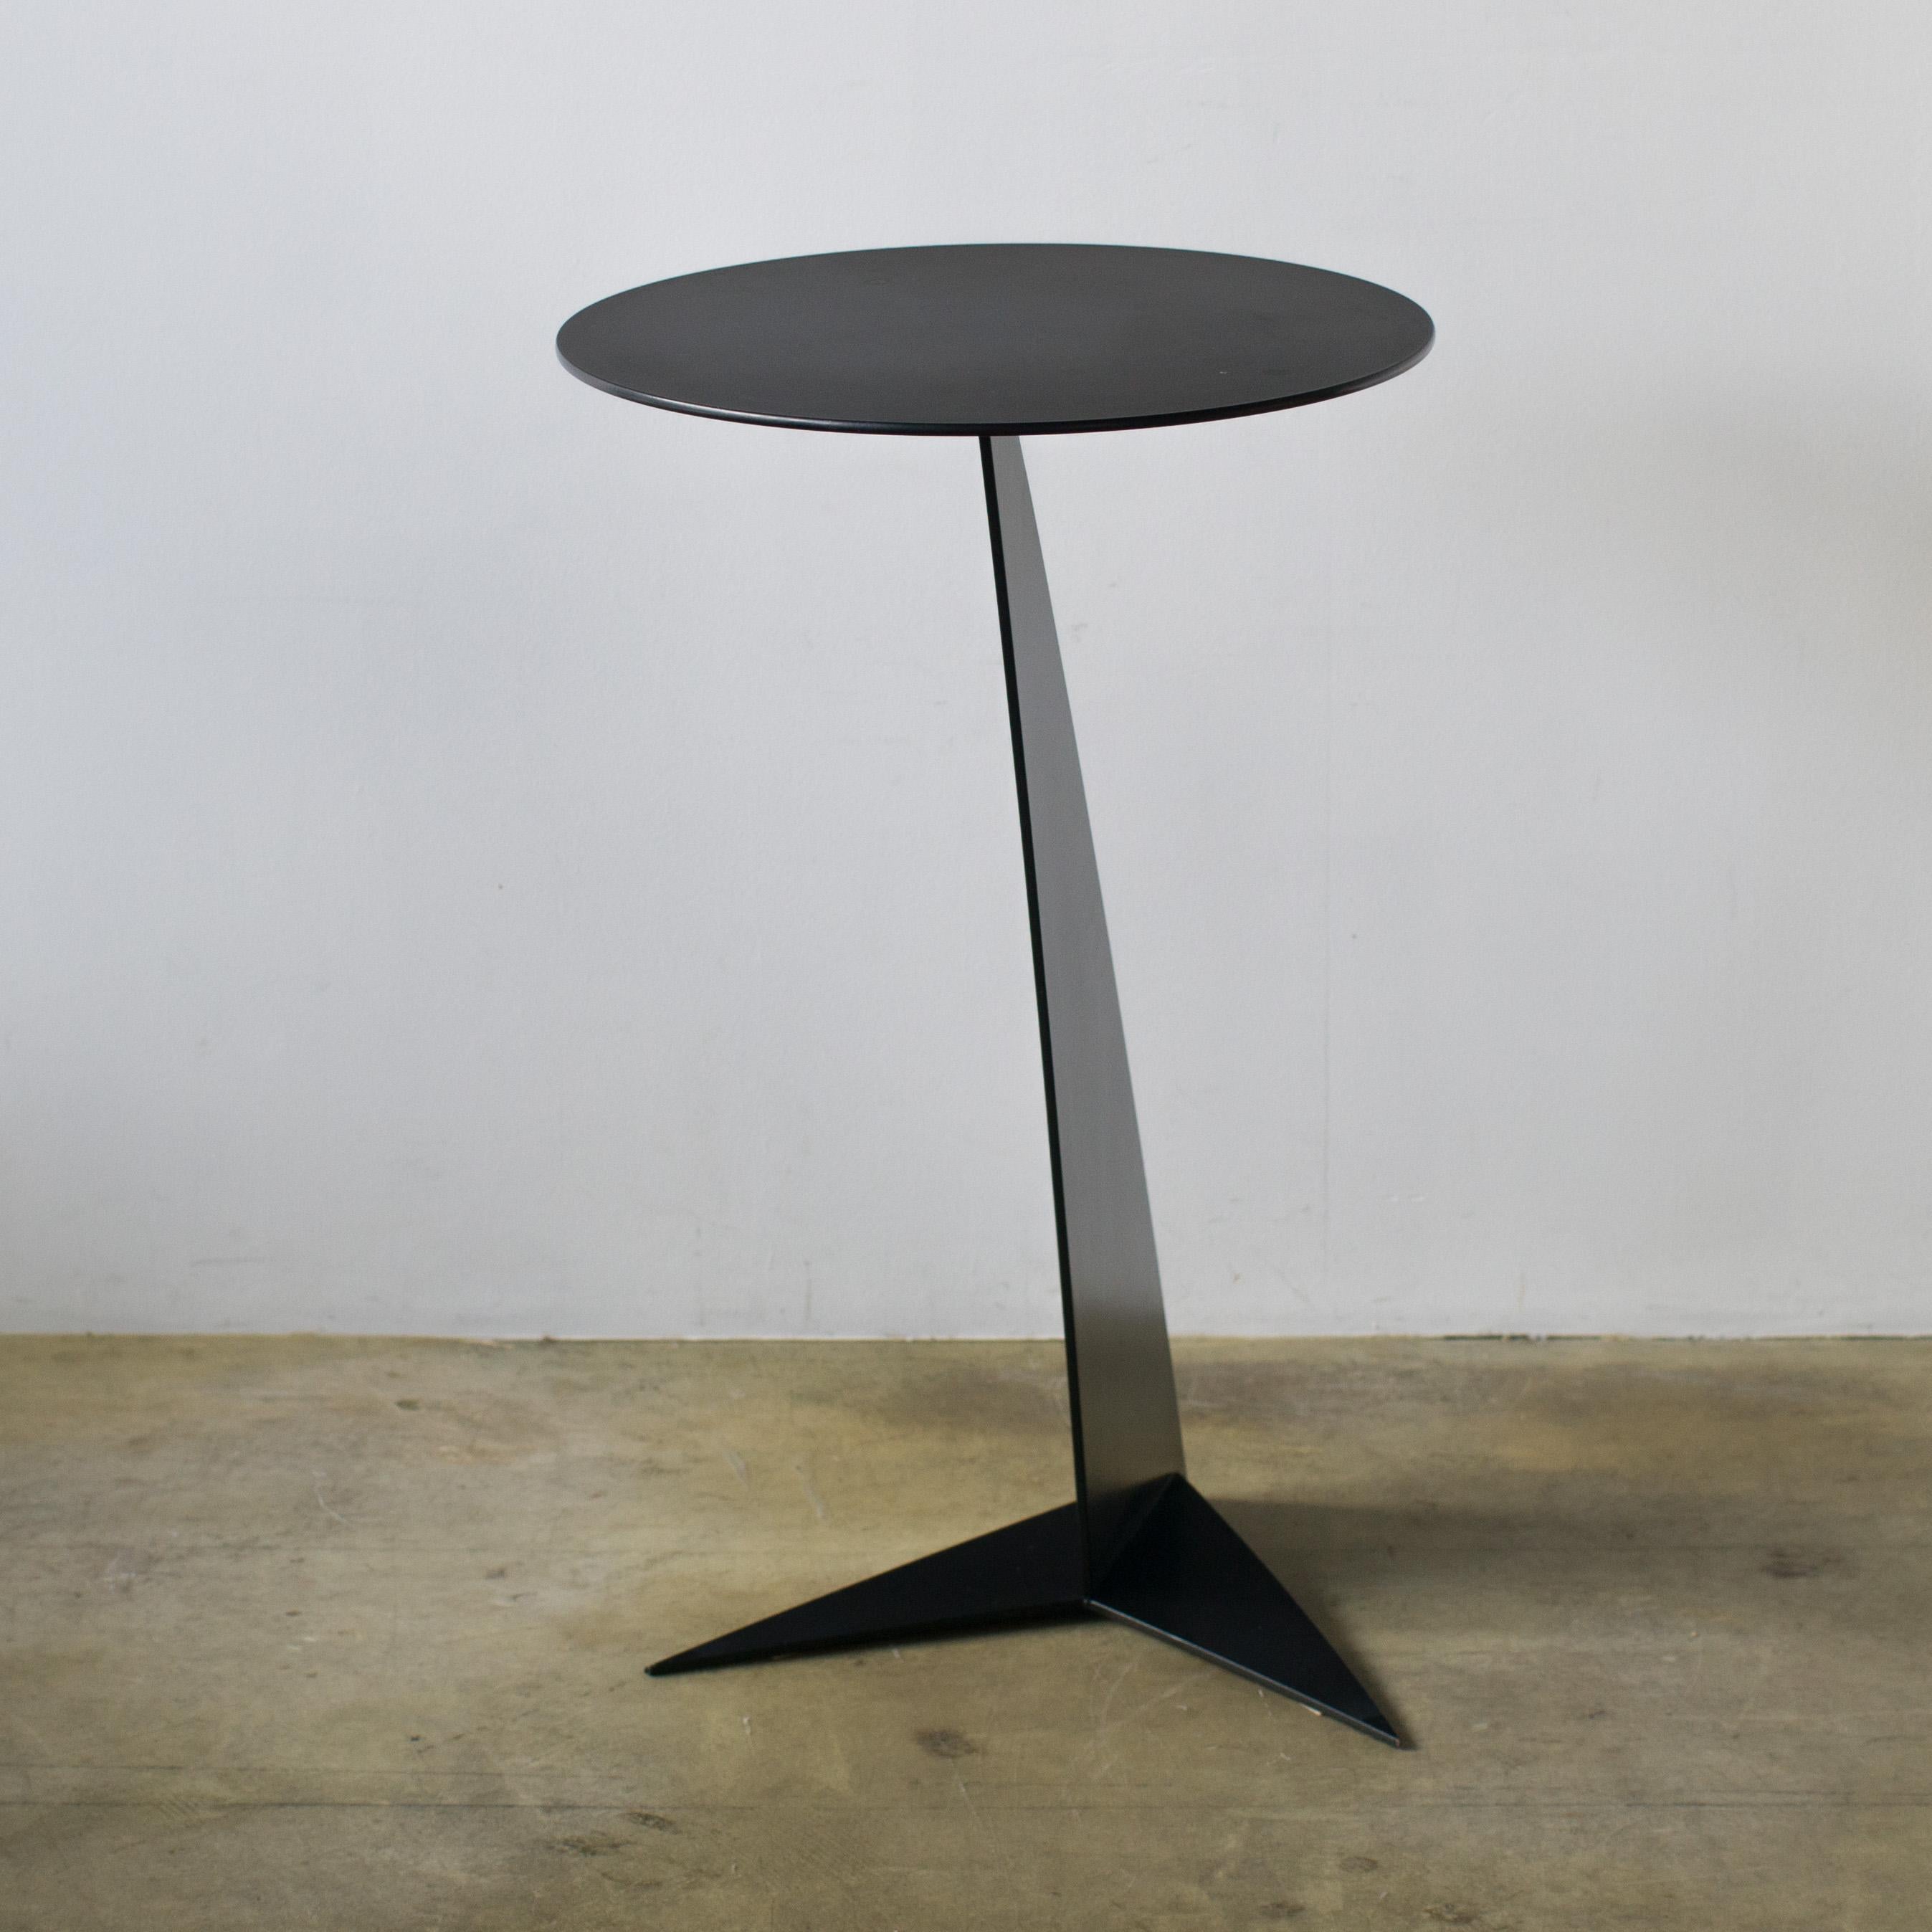 Side by Gilles Derain for Lumen Center Italia. Made of black painted steel.
Looks like sharp looking. 0s style structural form.
Board size is diameter 40 cm / 15.7 inch.